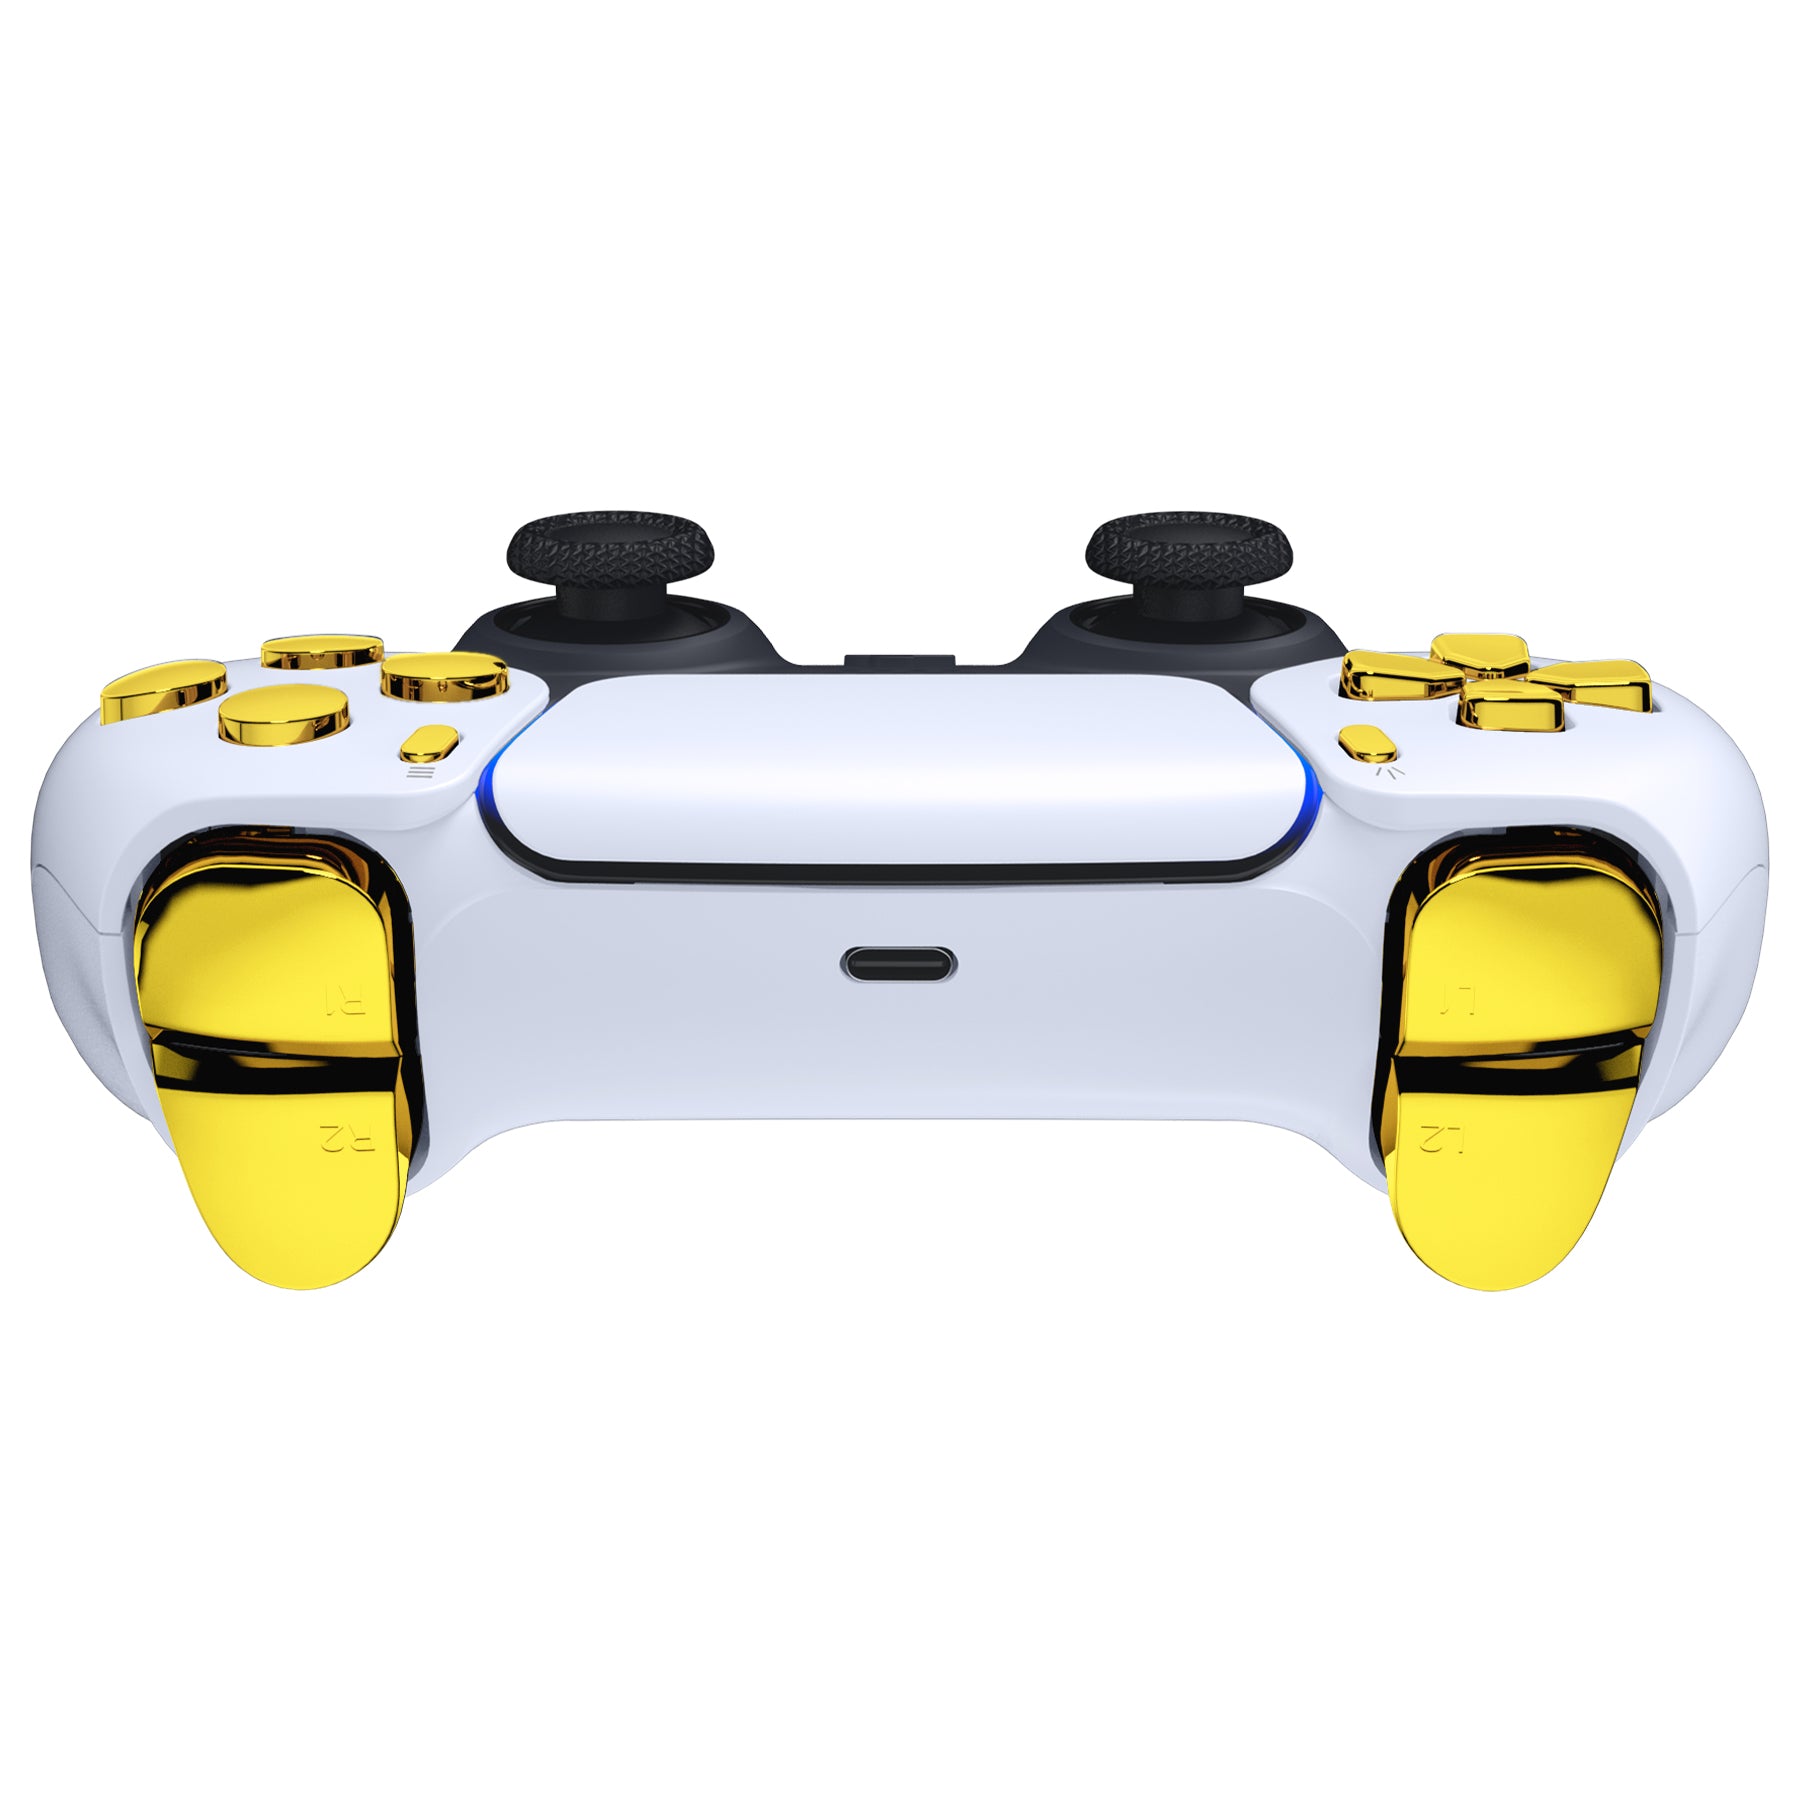 Glossy Chrome Gold 11in1 Button Kits Compatible With PS5 Controller BDM-030  - JPF2001G3WS